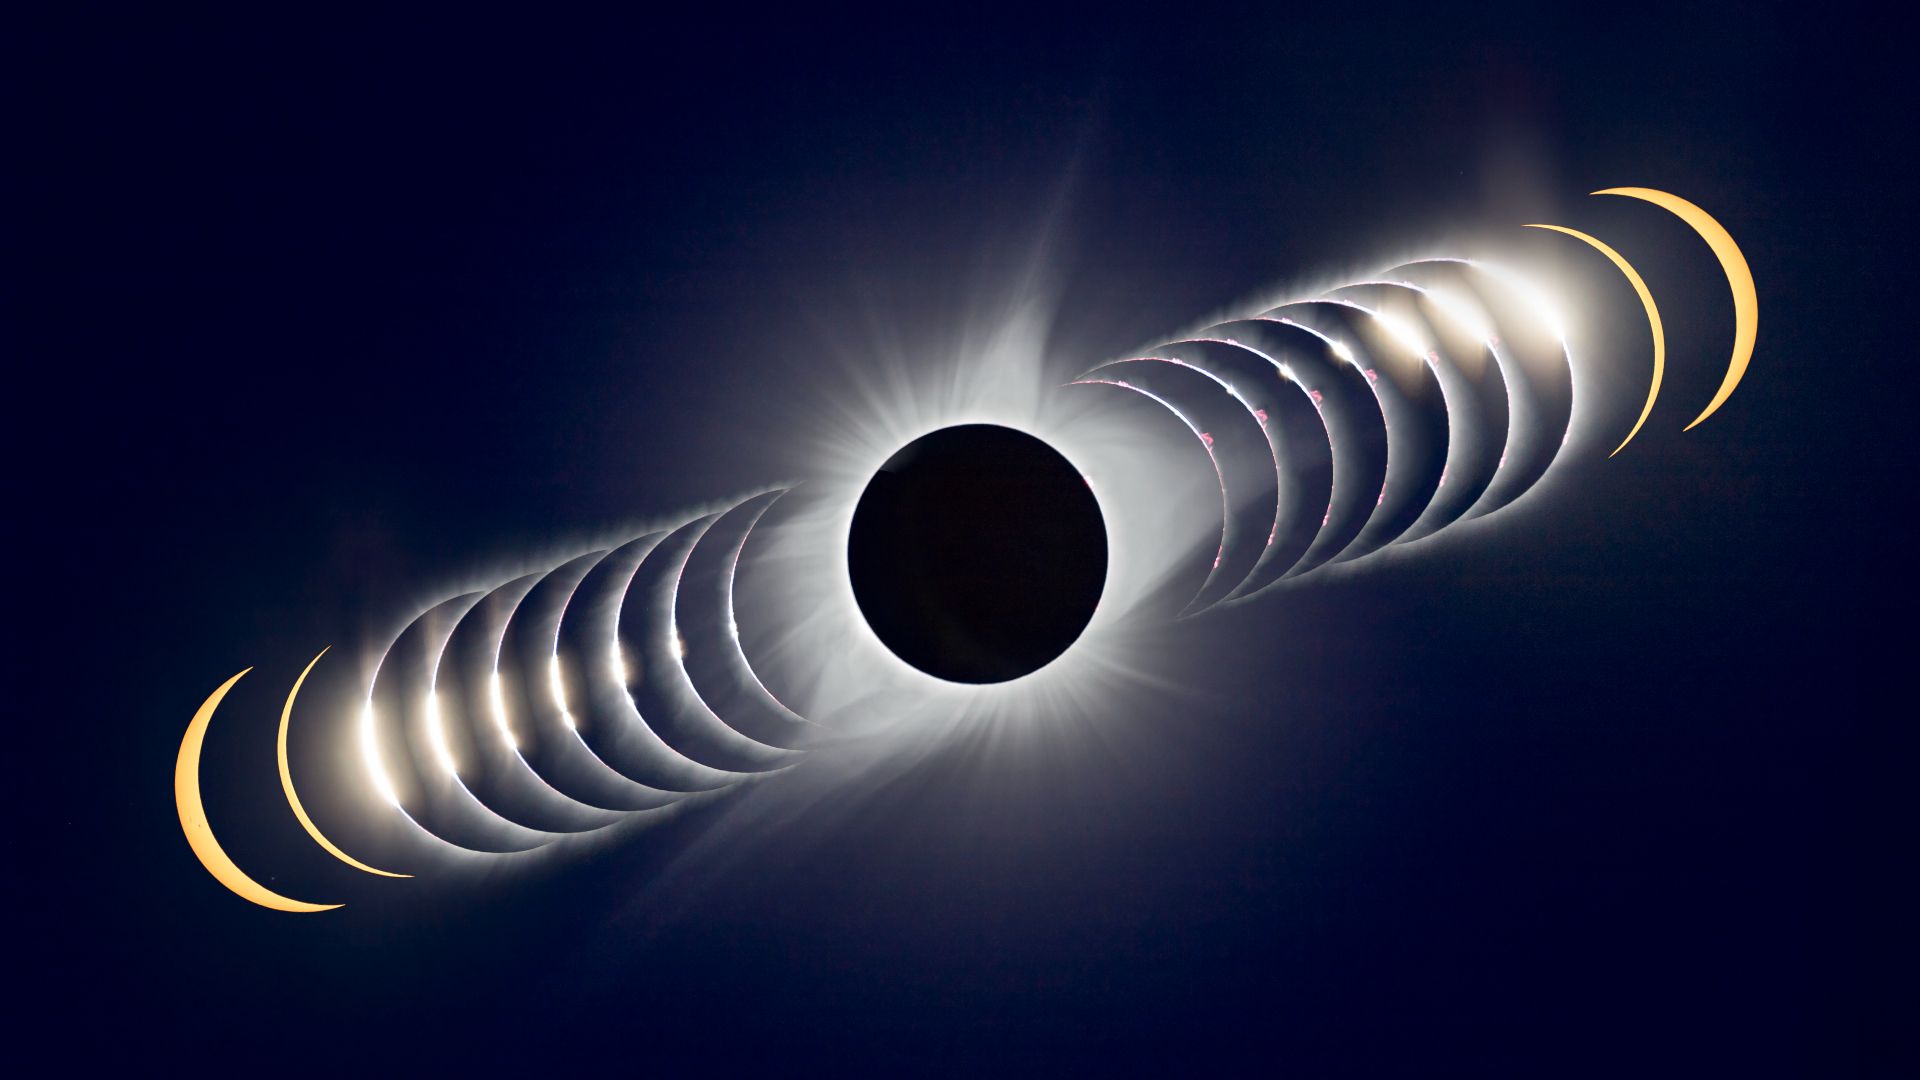 How to watch rare hybrid solar eclipse on April 20 Space